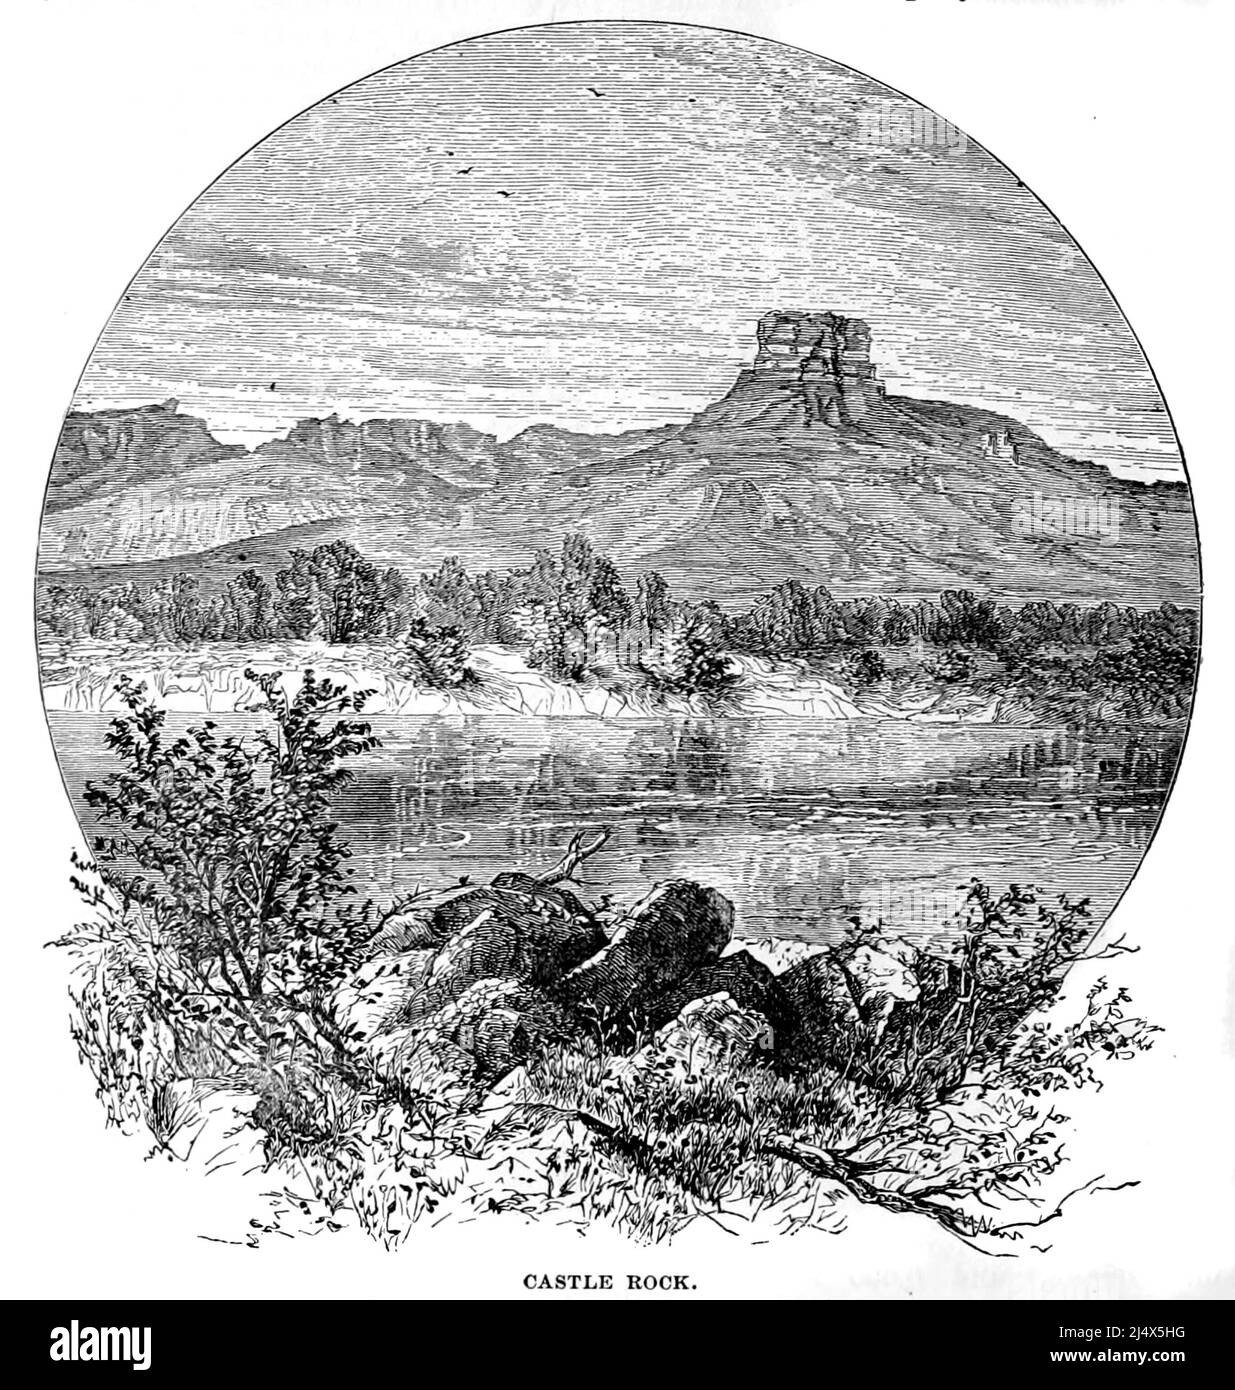 Castle Rock from the book The Pacific tourist : Adams & Bishop's illustrated trans-continental guide of travel, from the Atlantic to the Pacific Ocean : containing full descriptions of railroad routes across the continent, all pleasure resorts and places of most noted scenery in the Far West, also of all cities, towns, villages, U.S. forts, springs, lakes, mountains, routes of summer travel, best localities for hunting, fishing, sporting, and enjoyment, with all needful information for the pleasure traveler, miner, settler, or business man : a complete traveler's guide of the Union and Central Stock Photo